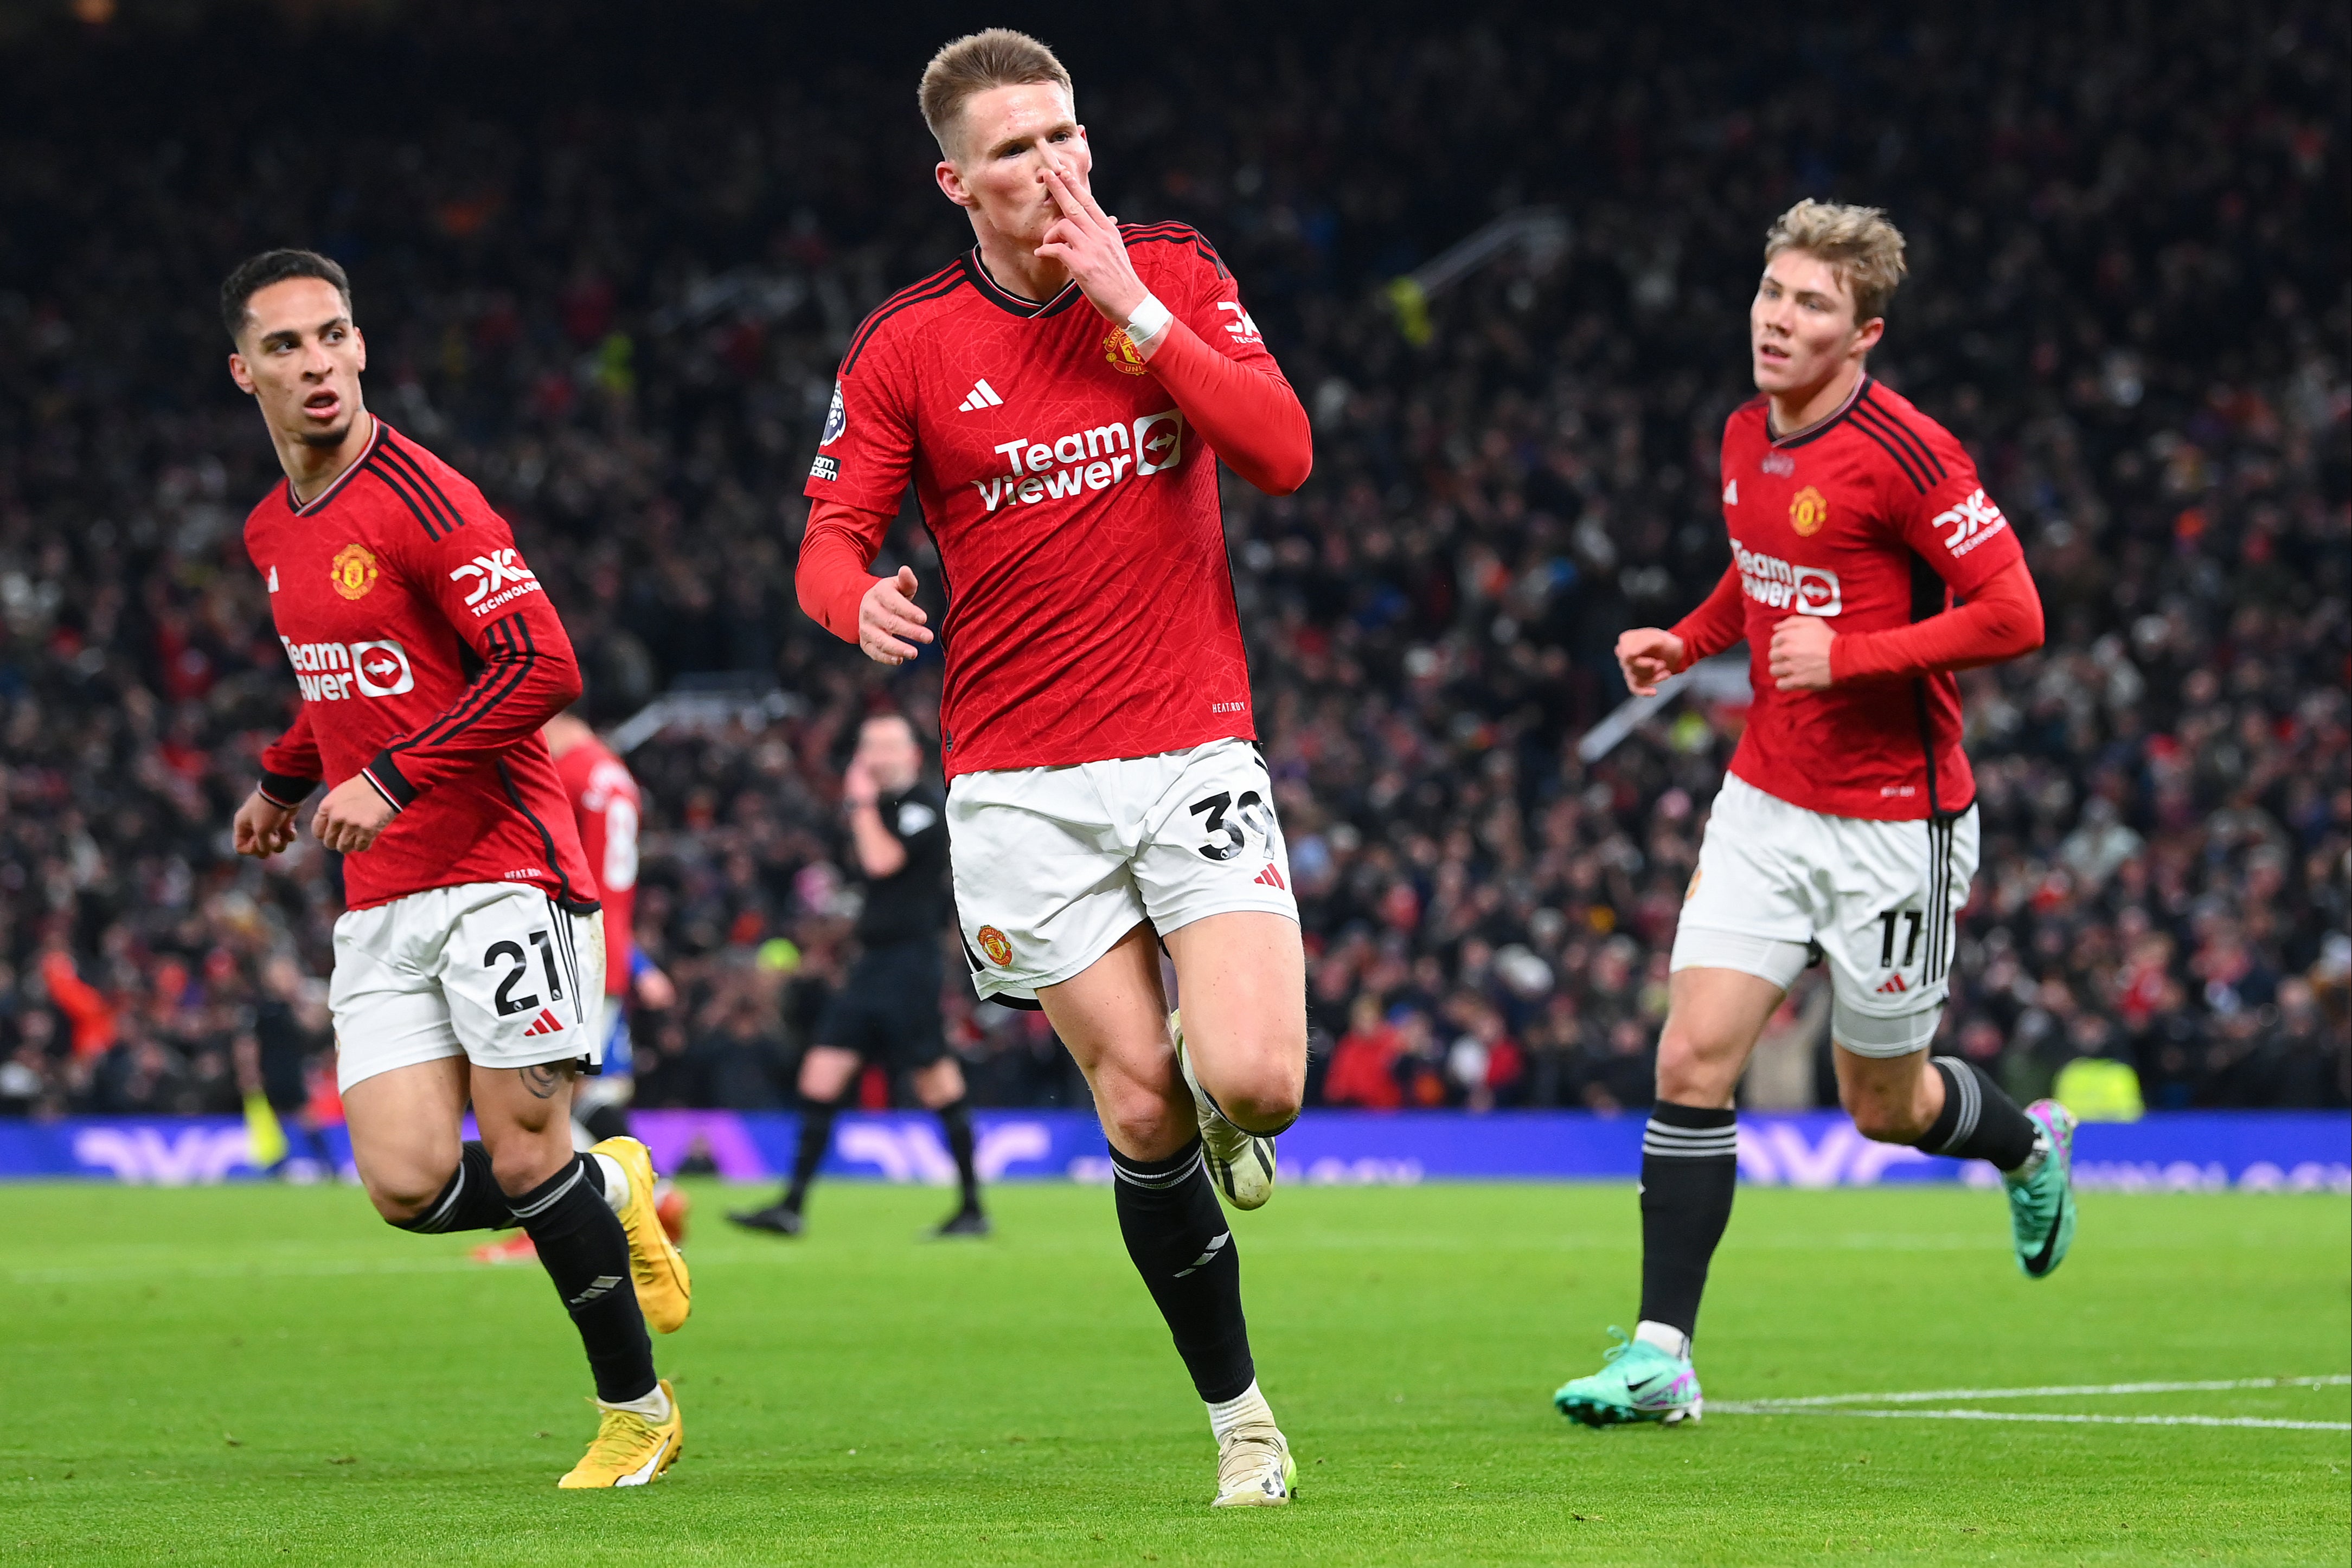 Manchester United have struggled to get firing this season but have shown glimpses of promise